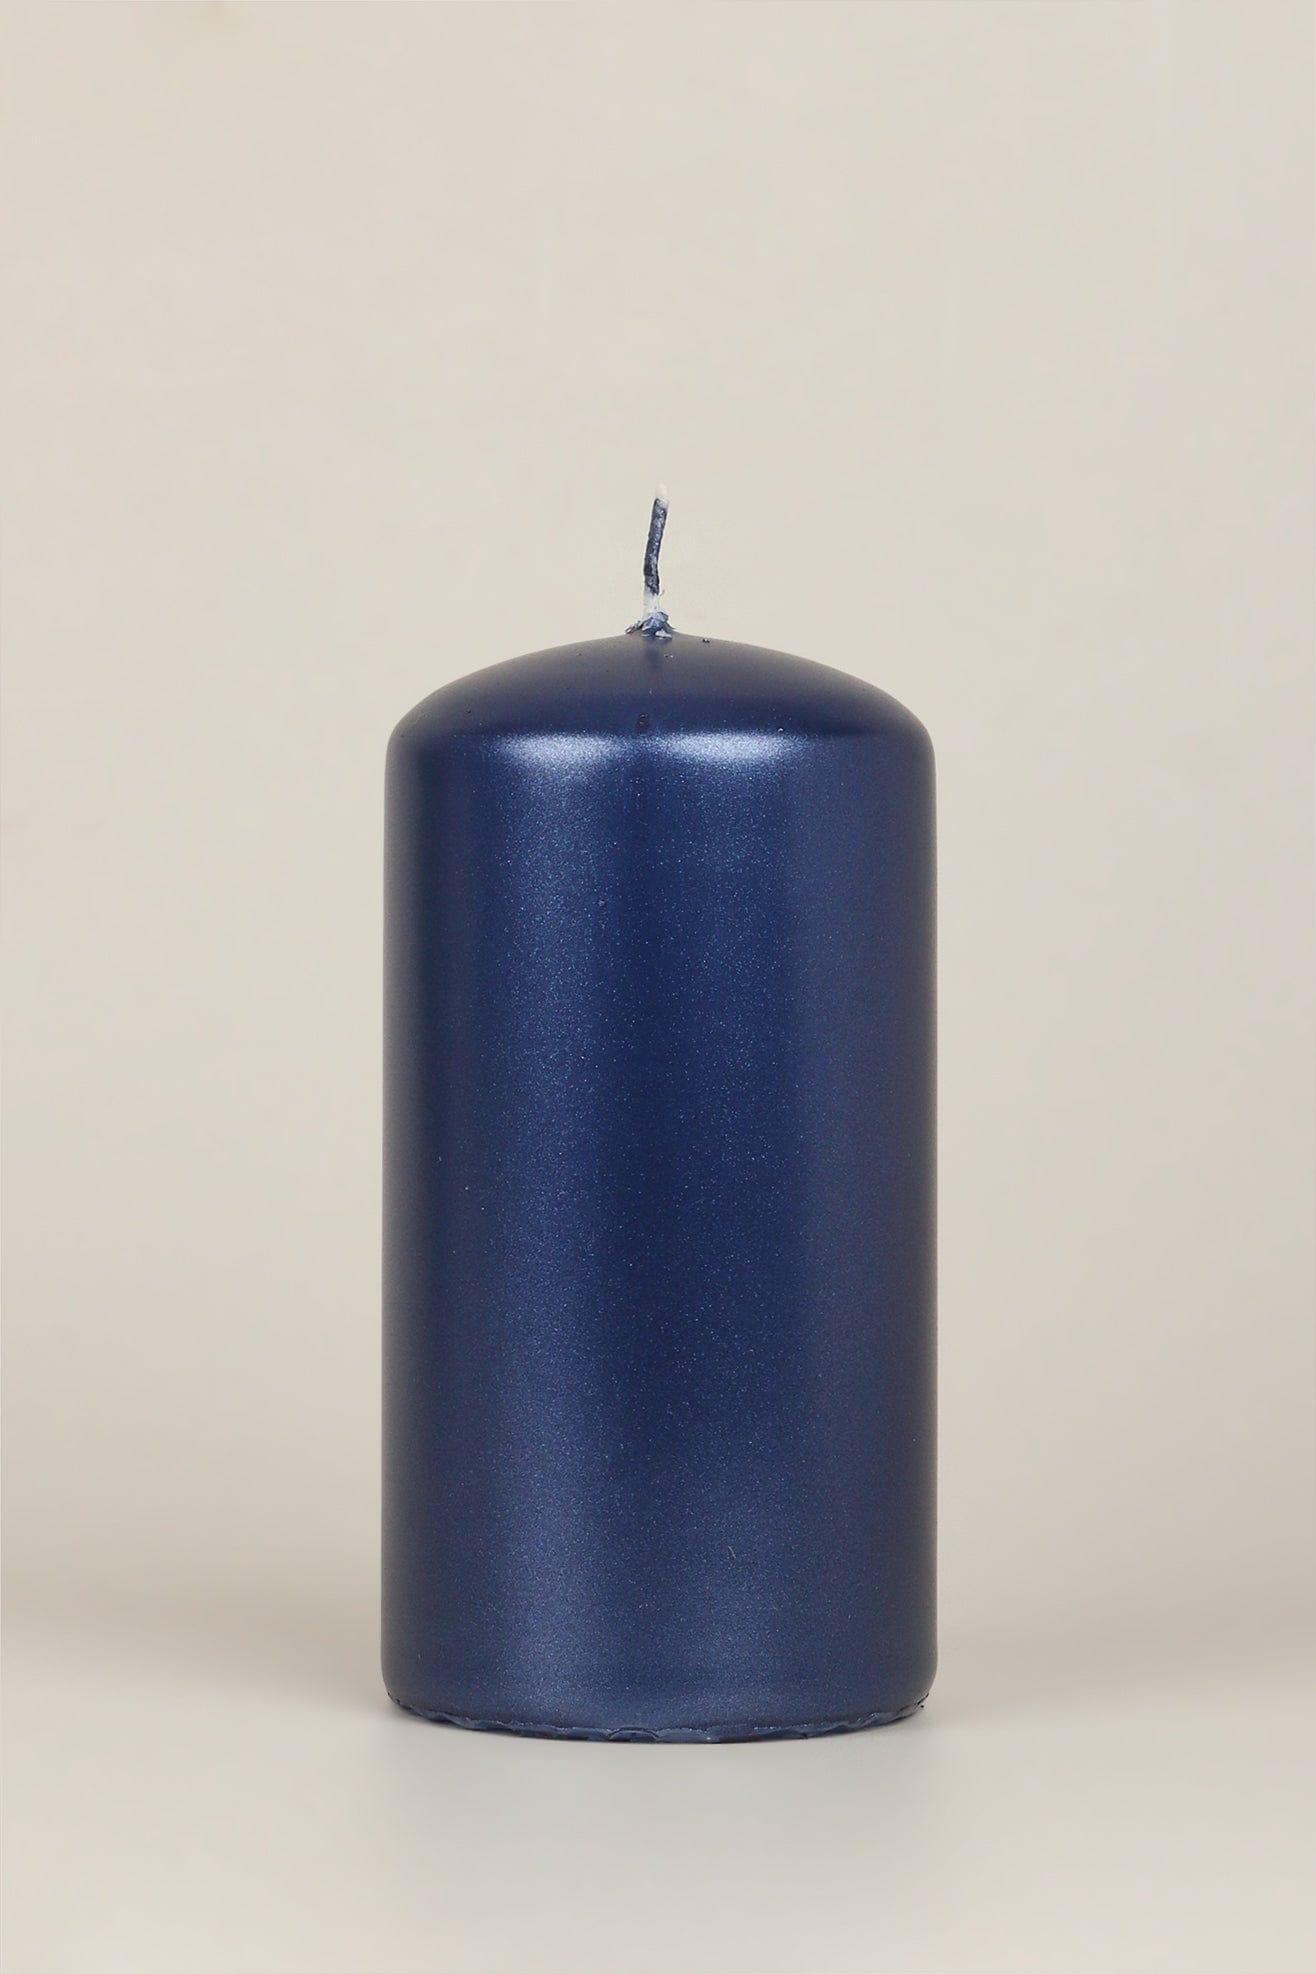 G Decor Candles & Candle Holders Blue / Small Pillar Grace Navy Blue Varnished Shimmer Metallic Shine Pillar Candle